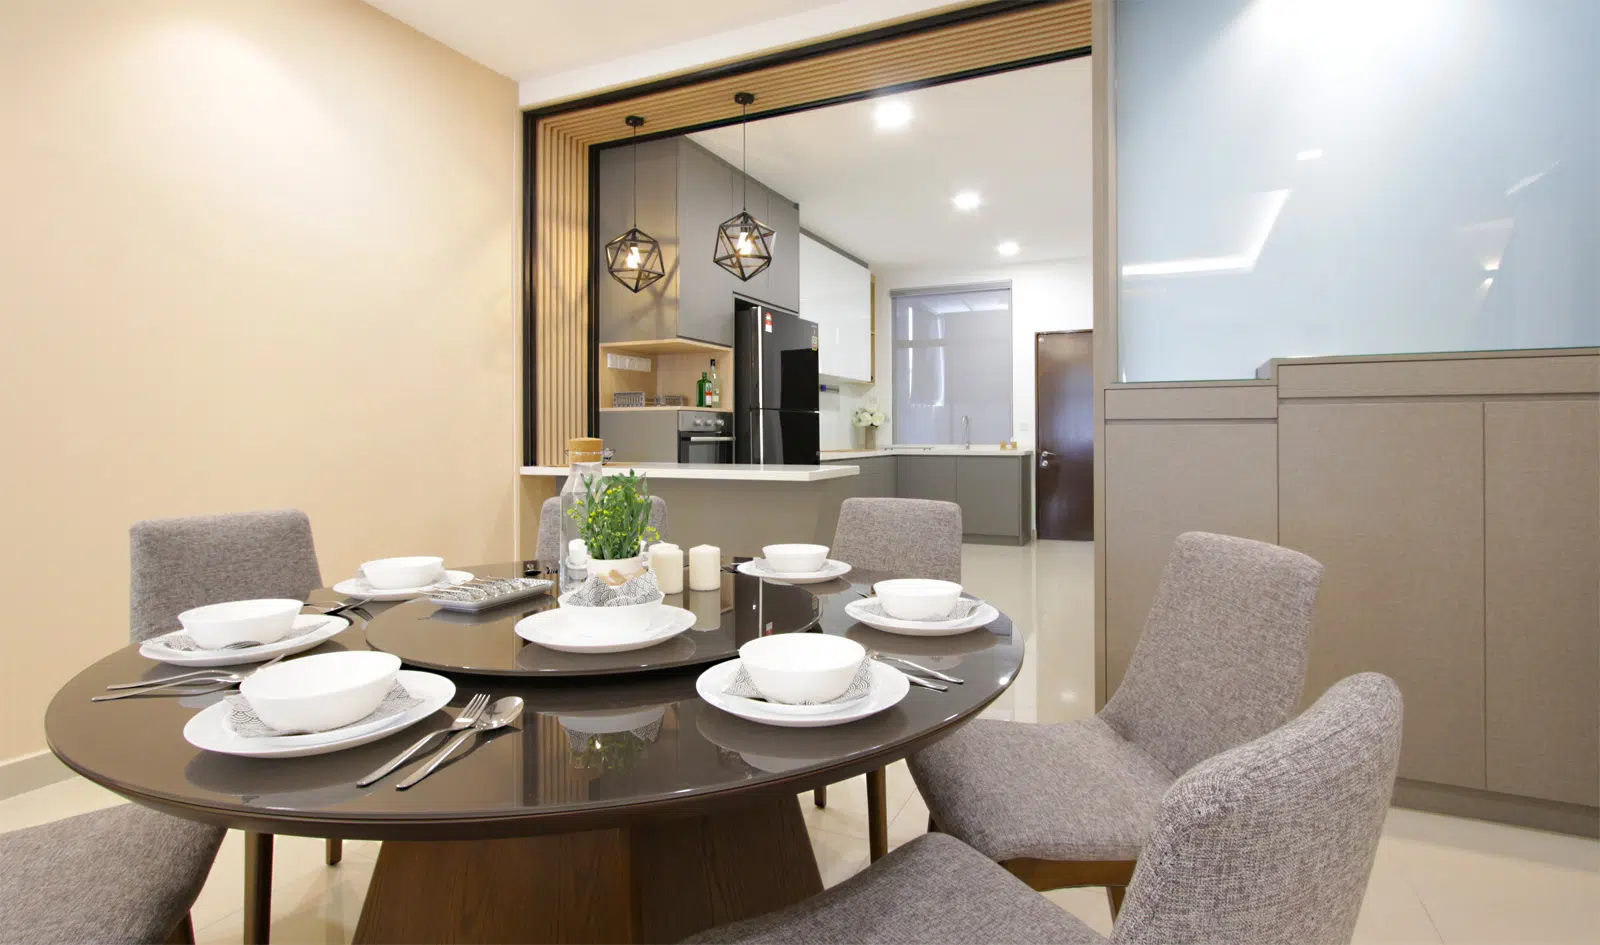 dining area of this house in southville city